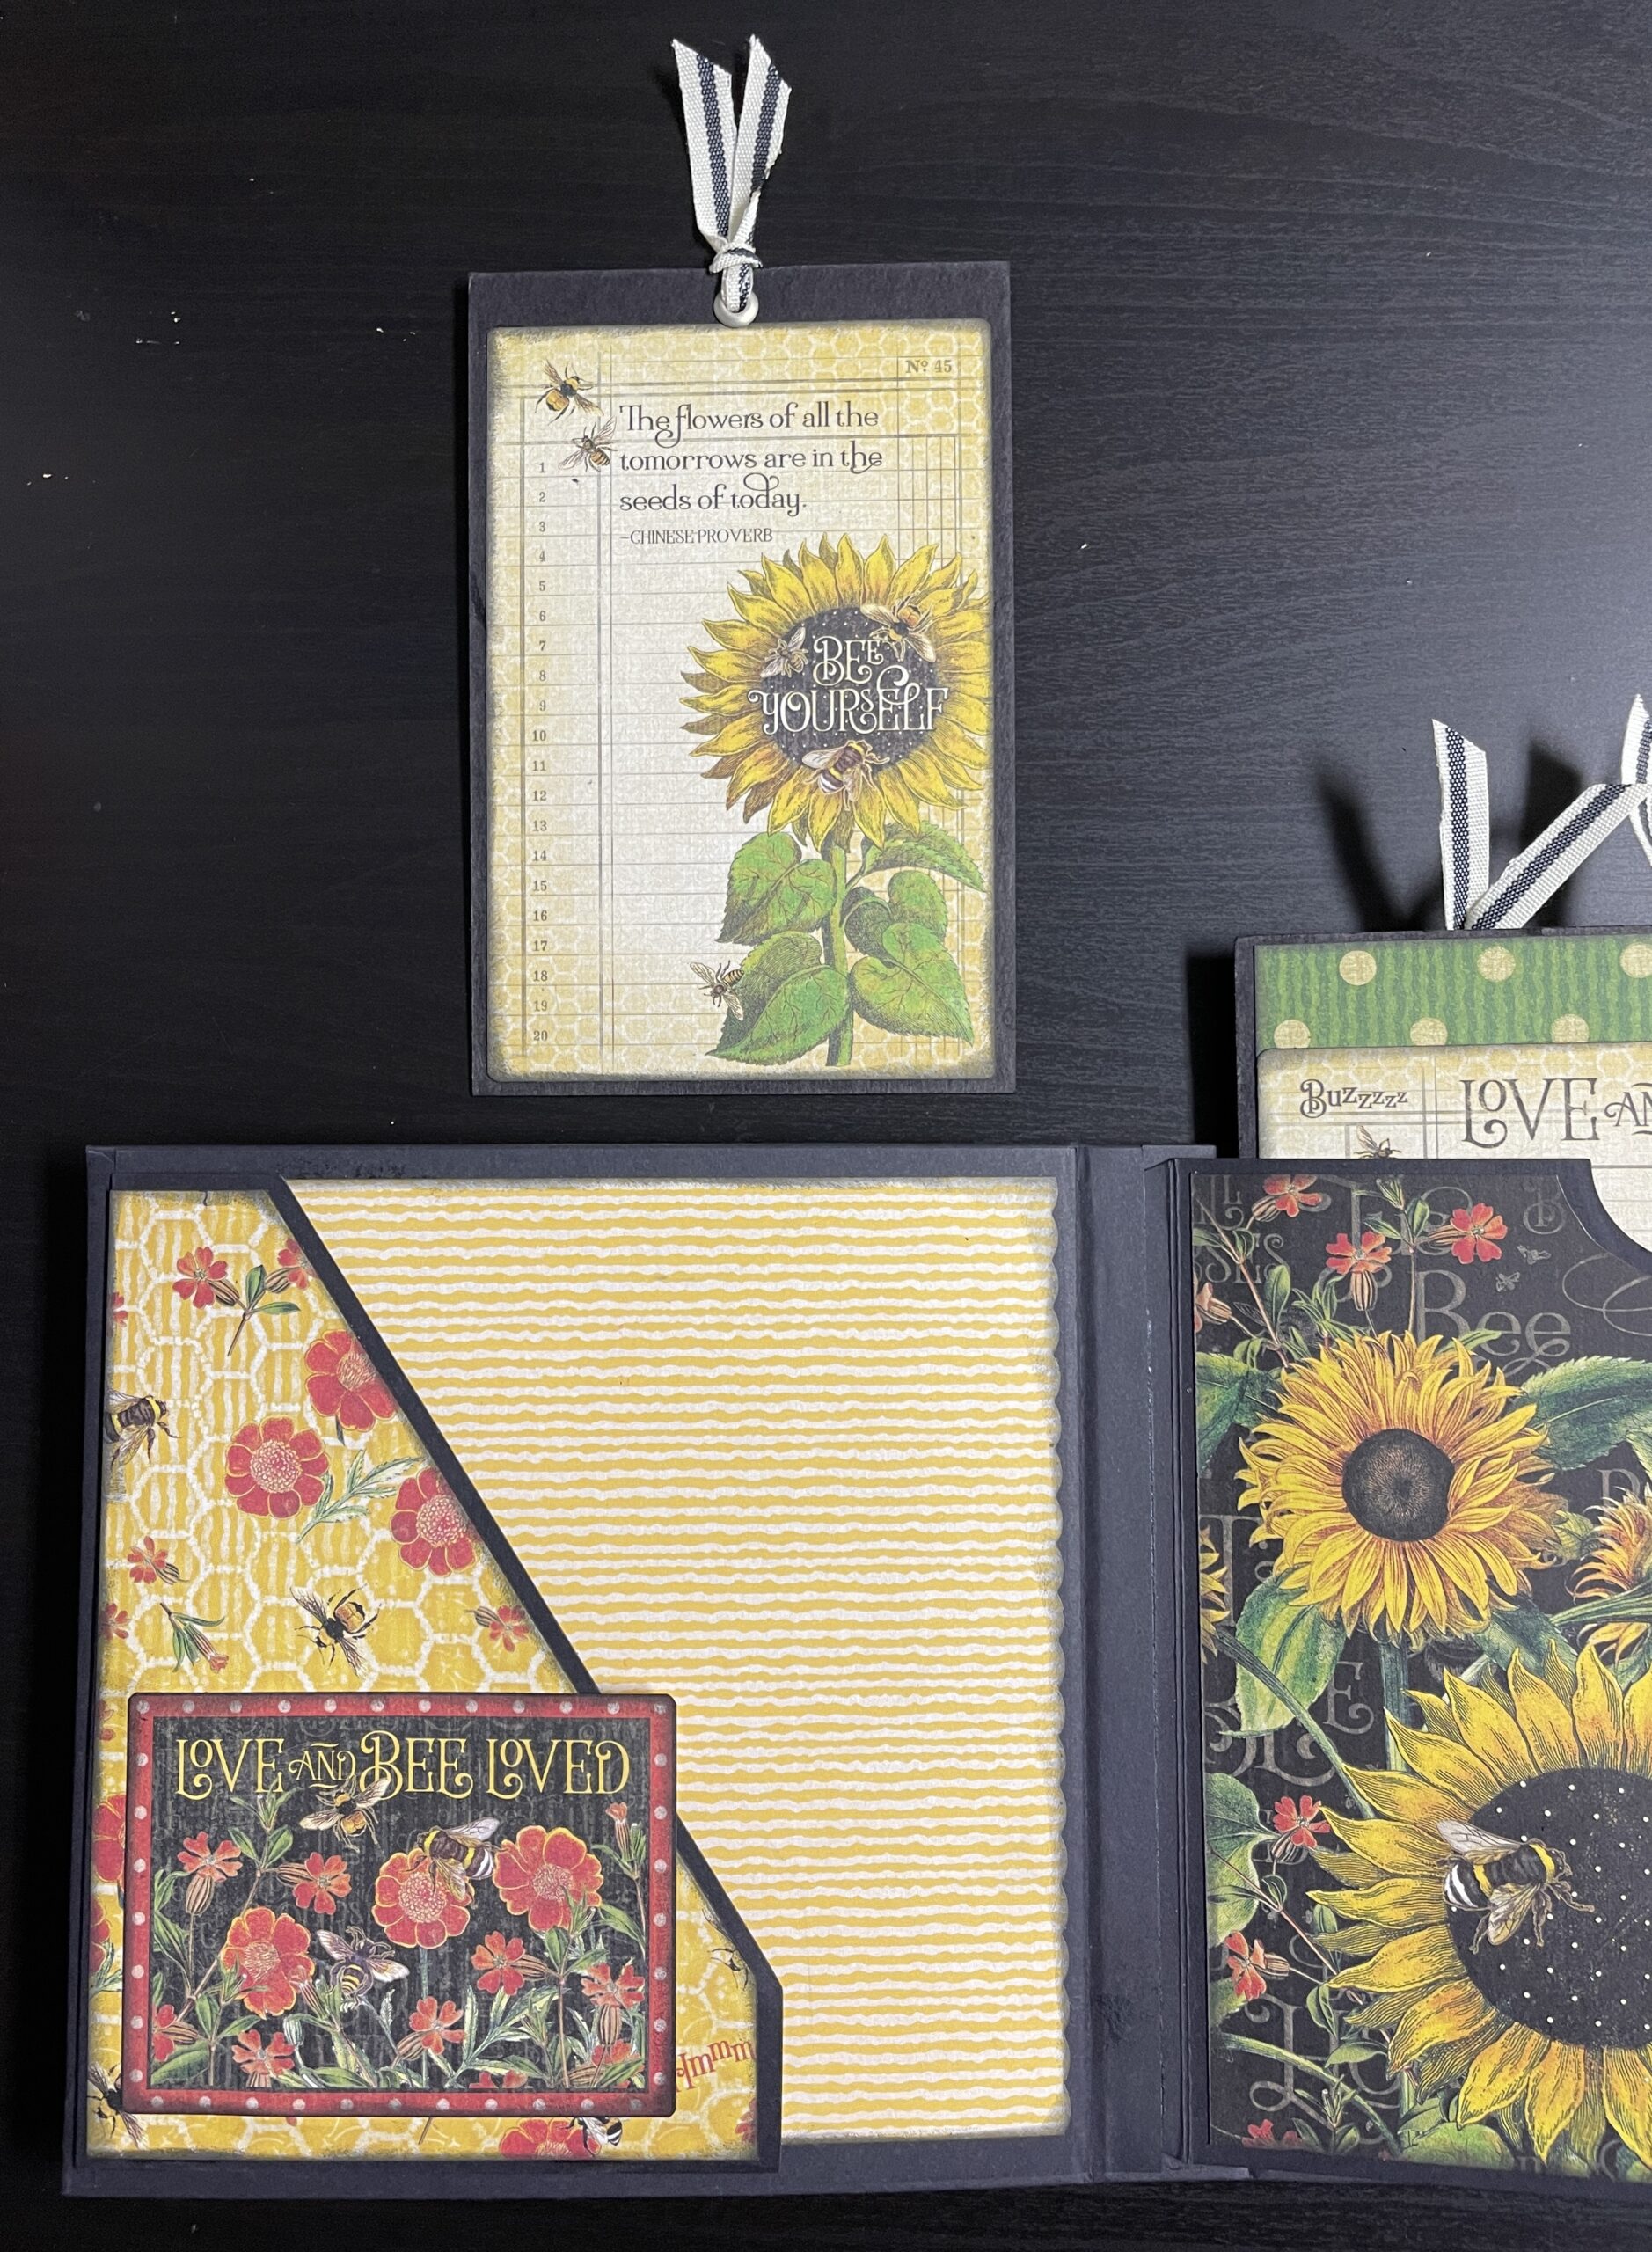 Graphic 45 Let it Bee Stamp Set – Cheap Scrapbook Stuff